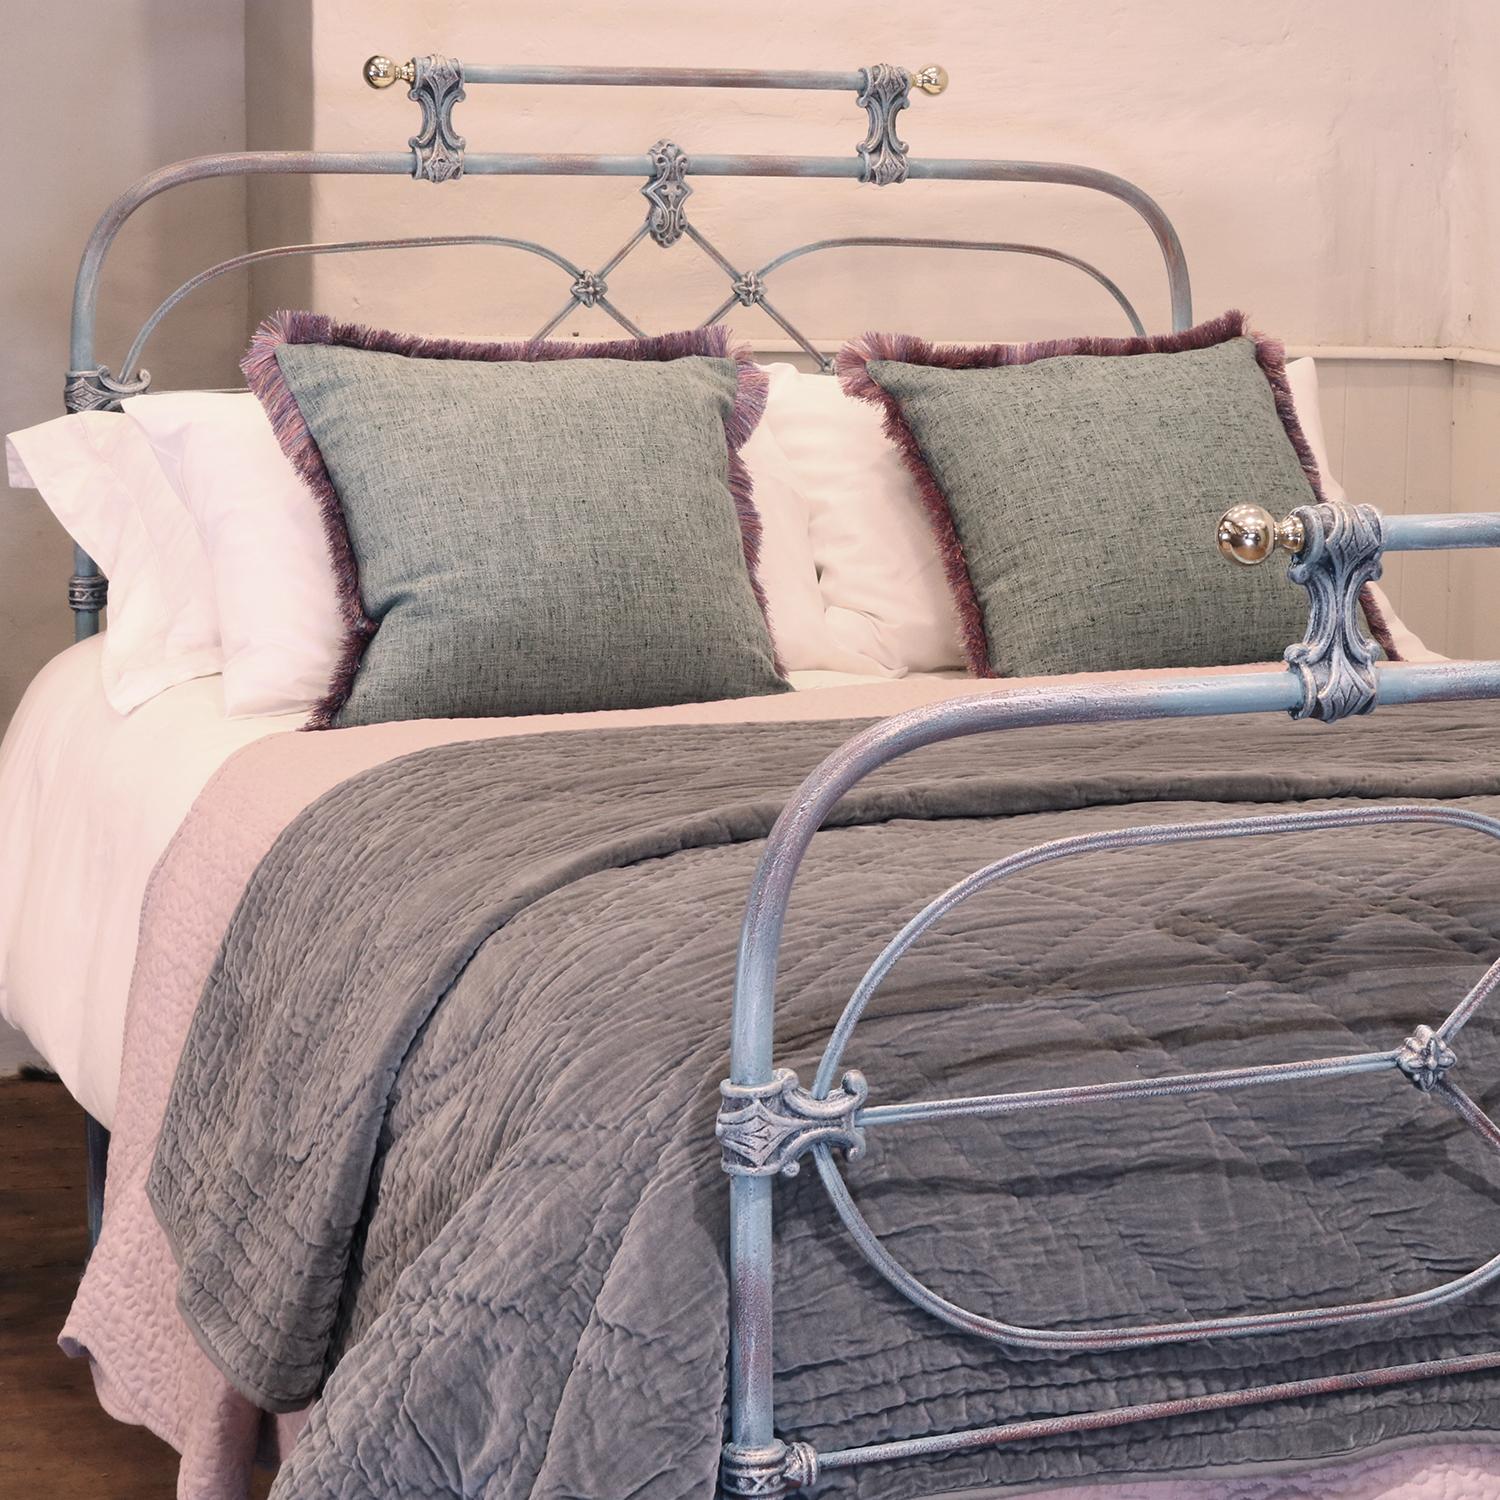 Cast iron antique bed, finished in blue verdigris with decorative castings, gallery rail and brass knobs.

This bed accepts a double size 4ft 6in wide (54 inch or 135cm) base and mattress. 

The price includes a FIRM standard bed base to support